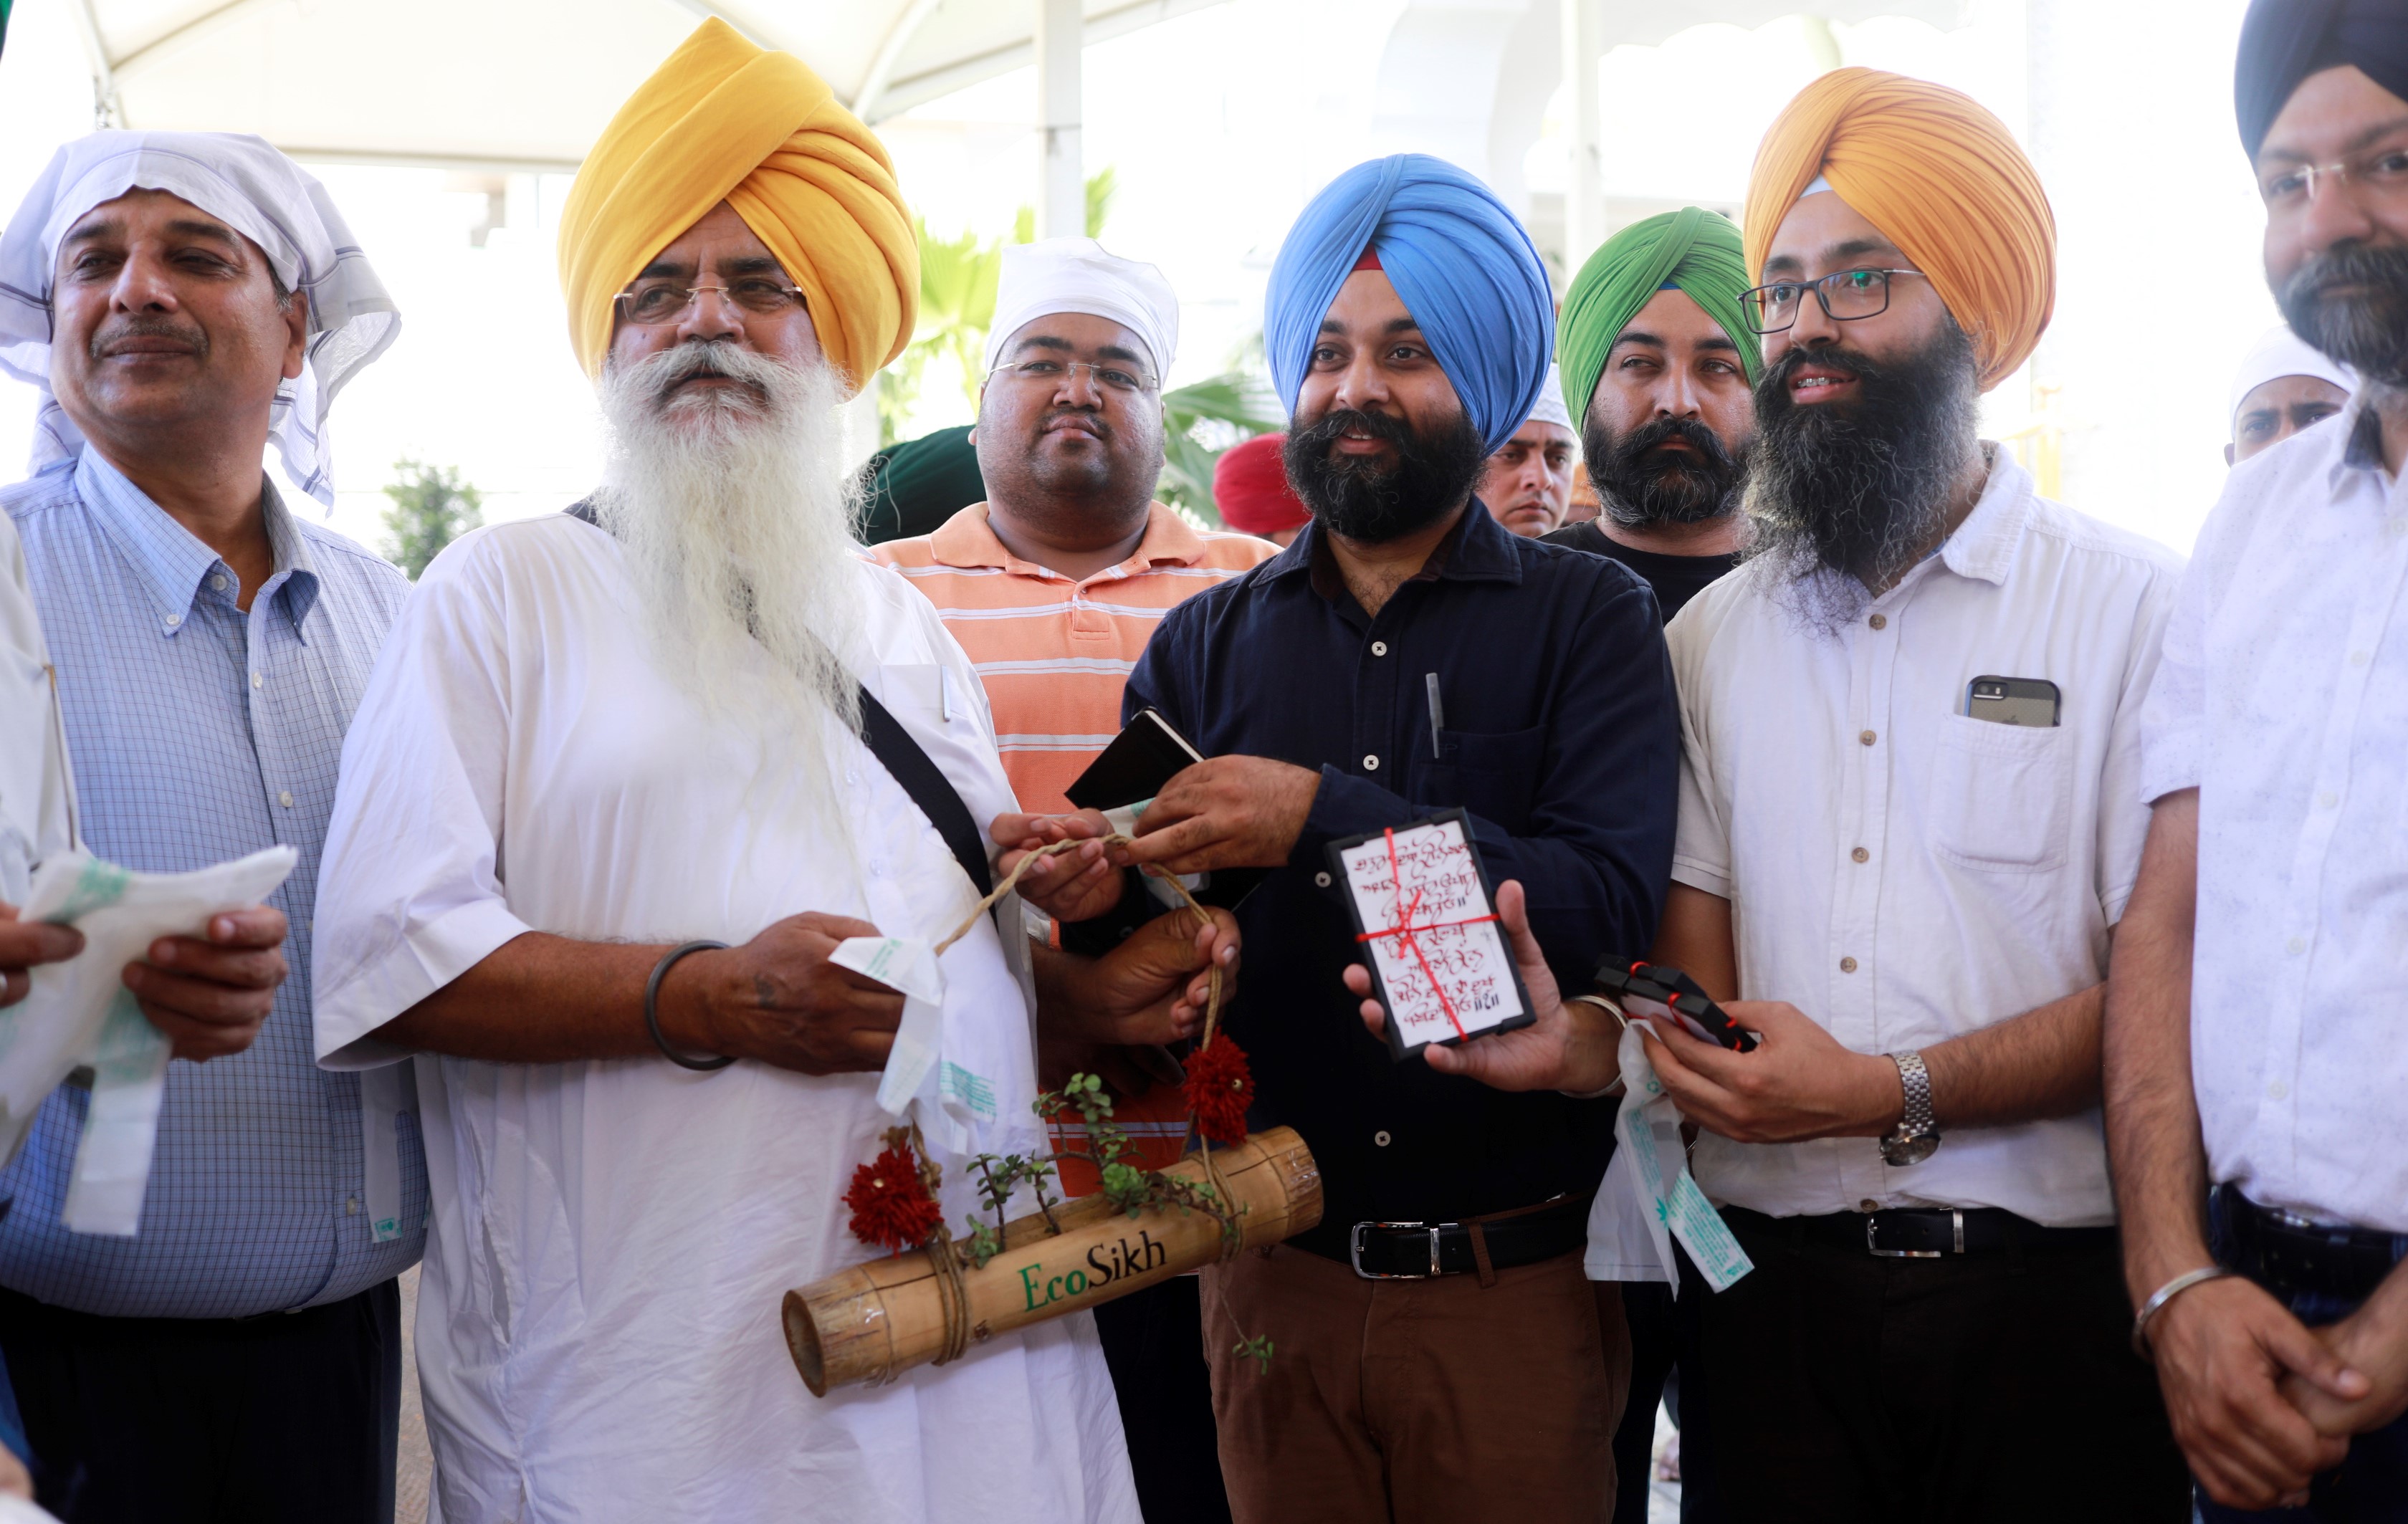 PPCB and EcoSikh join hands to promote compostable bags in Punjab